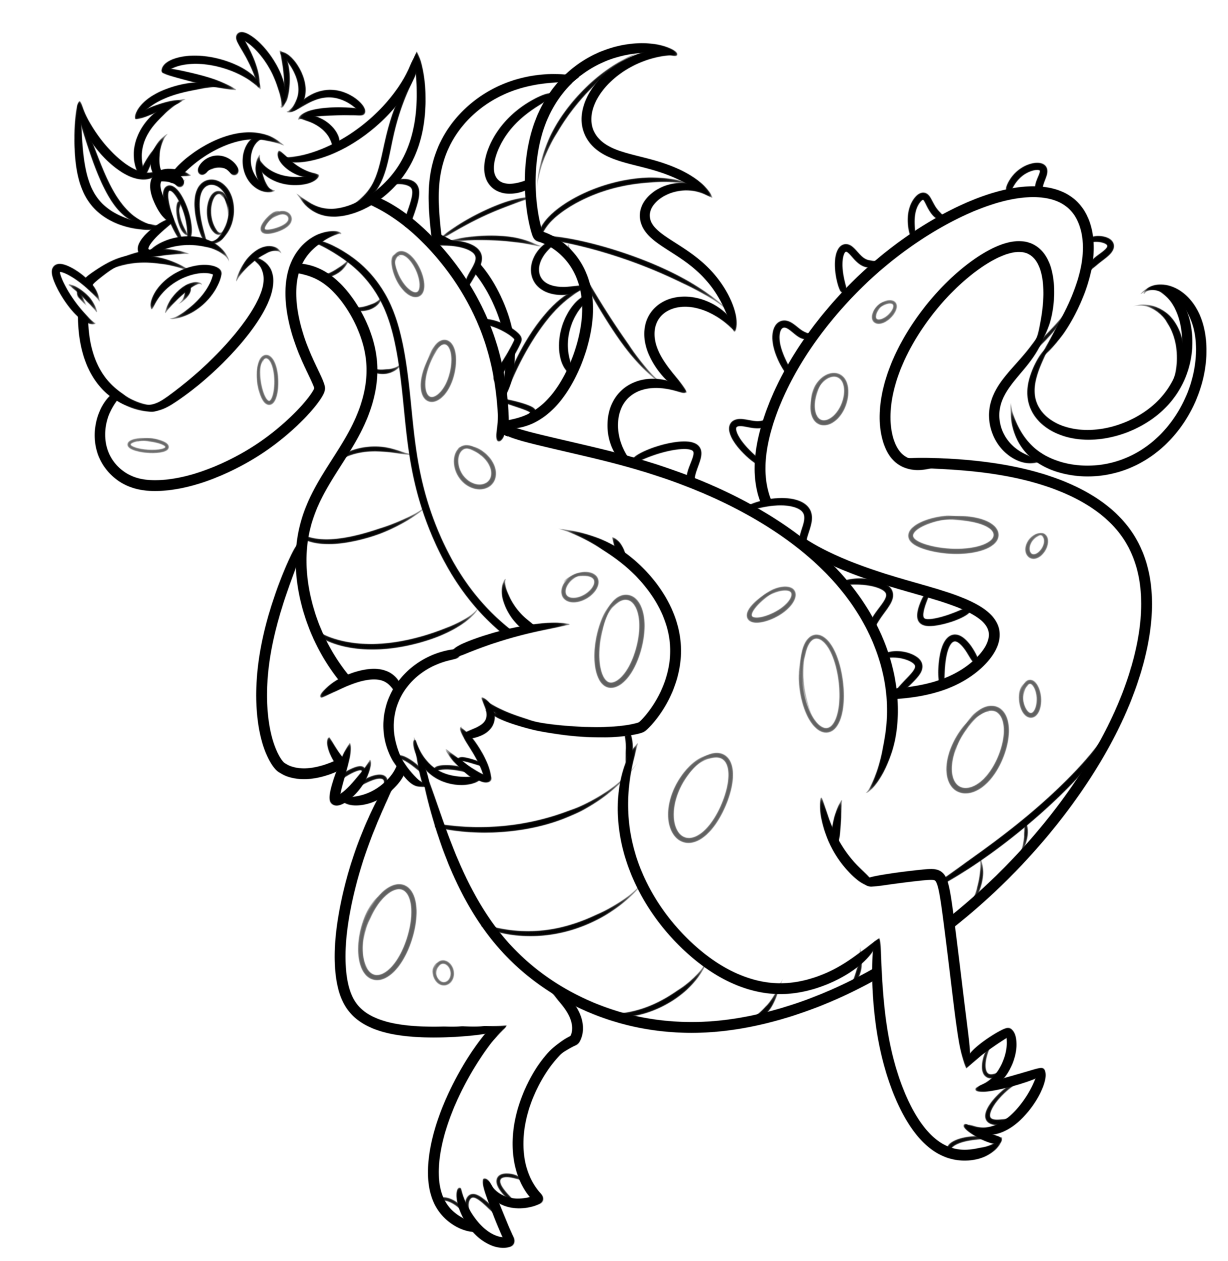 dragon color sheets dragon coloring pages to download and print for free sheets color dragon 